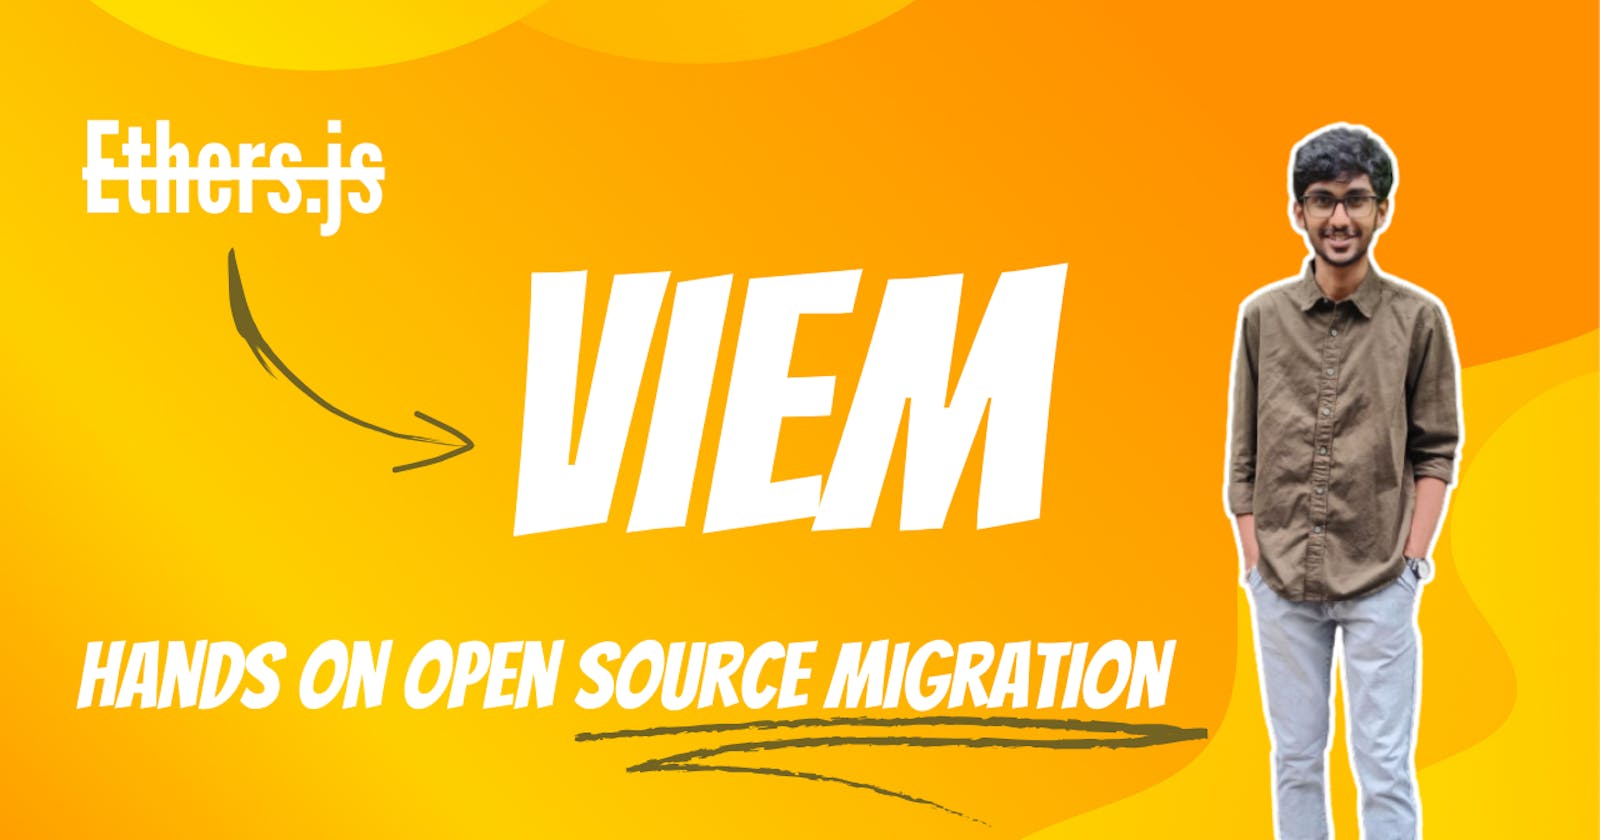 Ethers.js to Viem: A Hands-On Open Source Migration